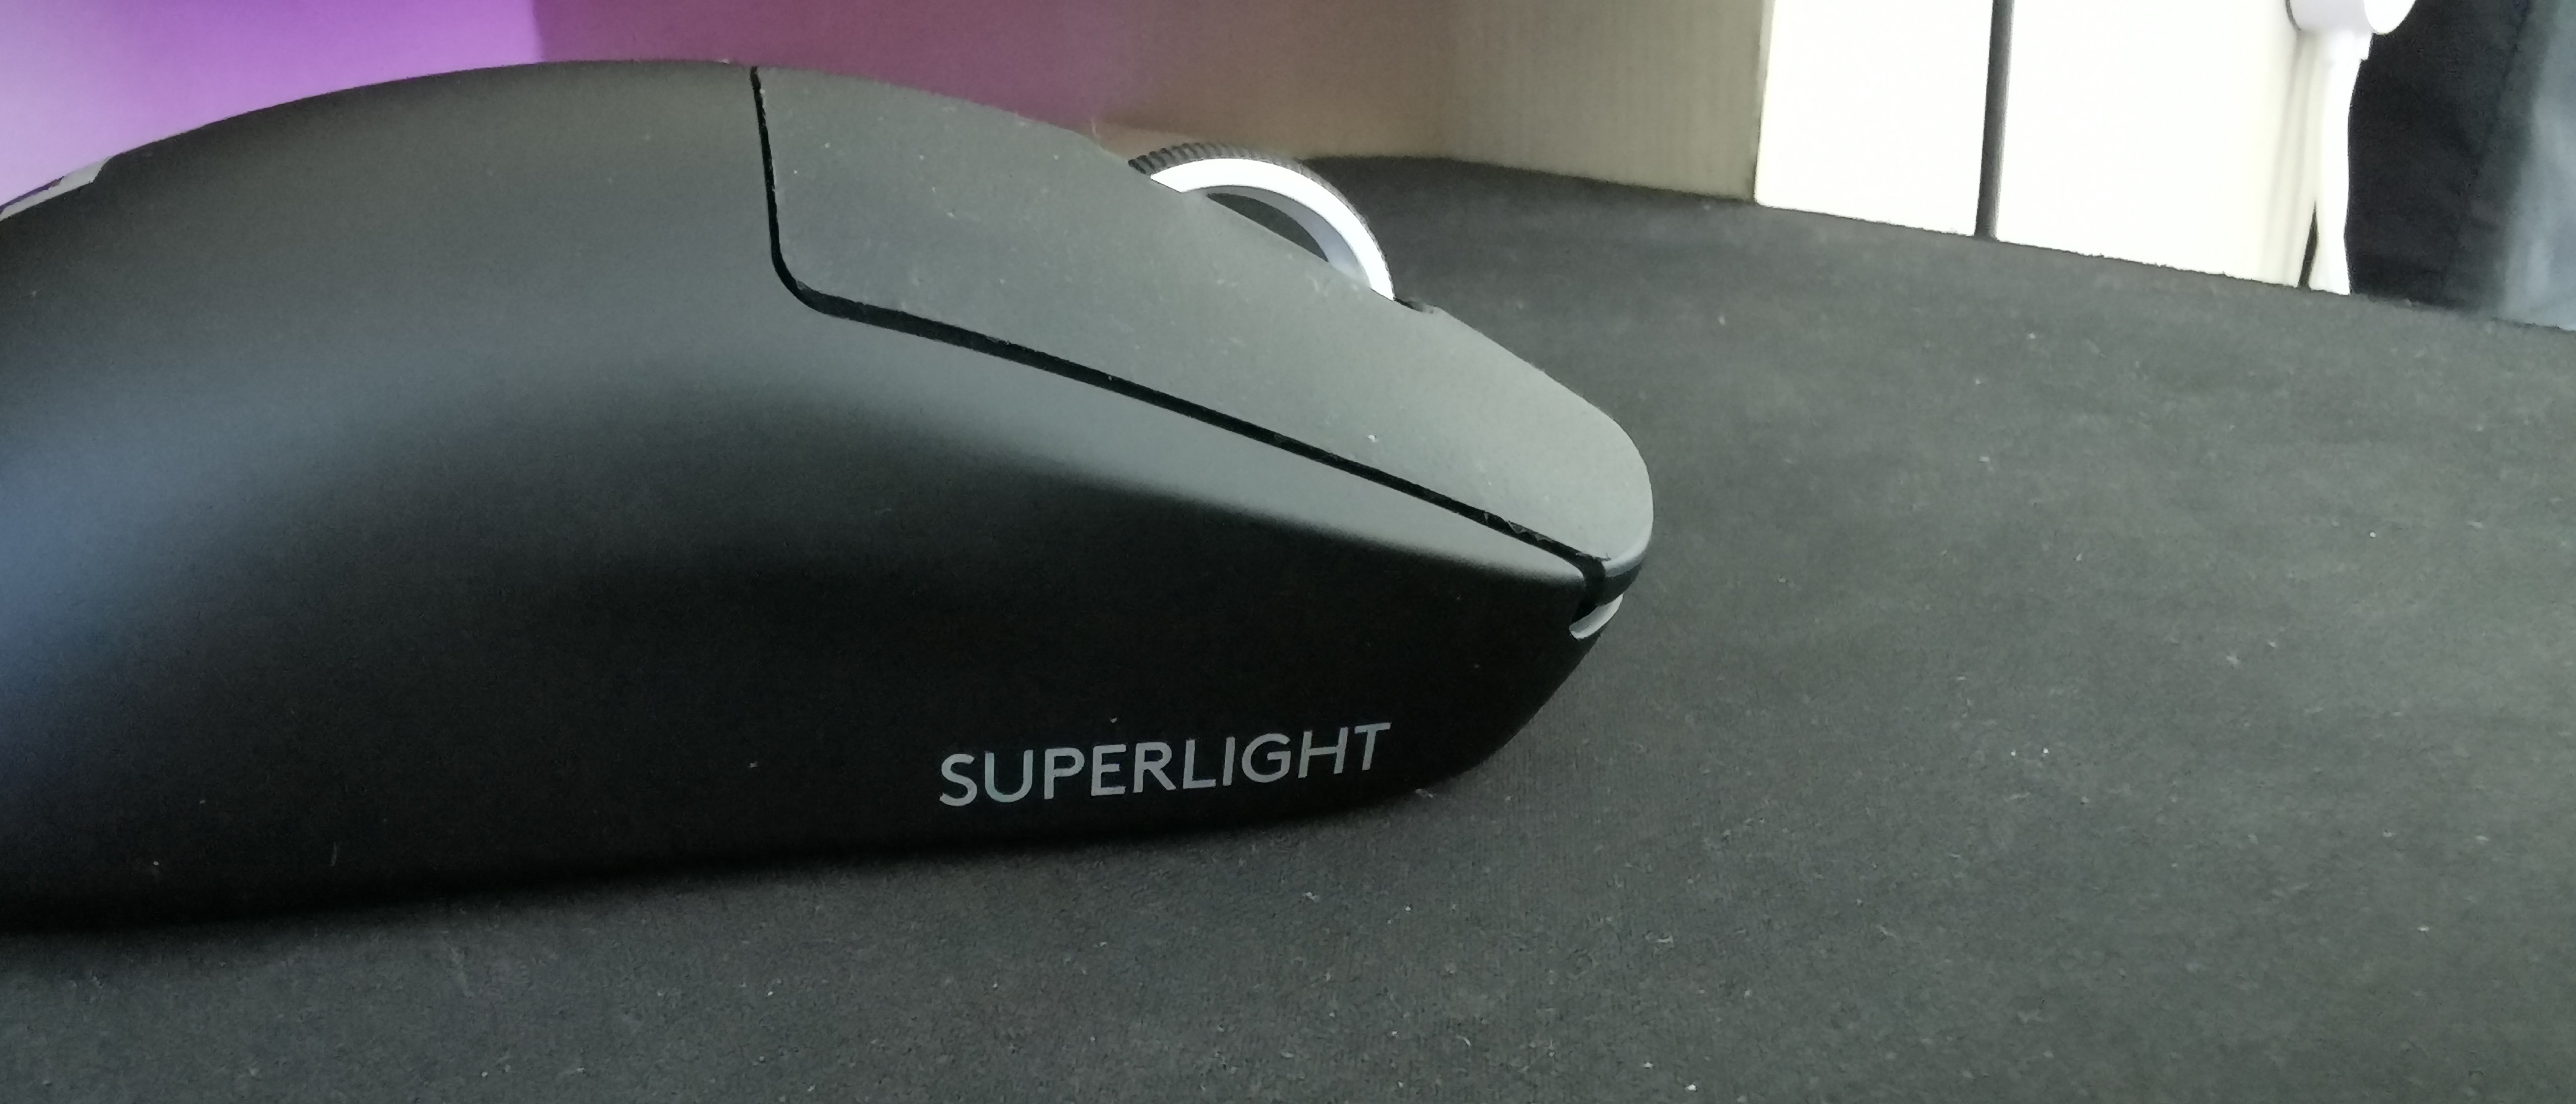 Logitech G Pro X Superlight Reviews, Pros and Cons